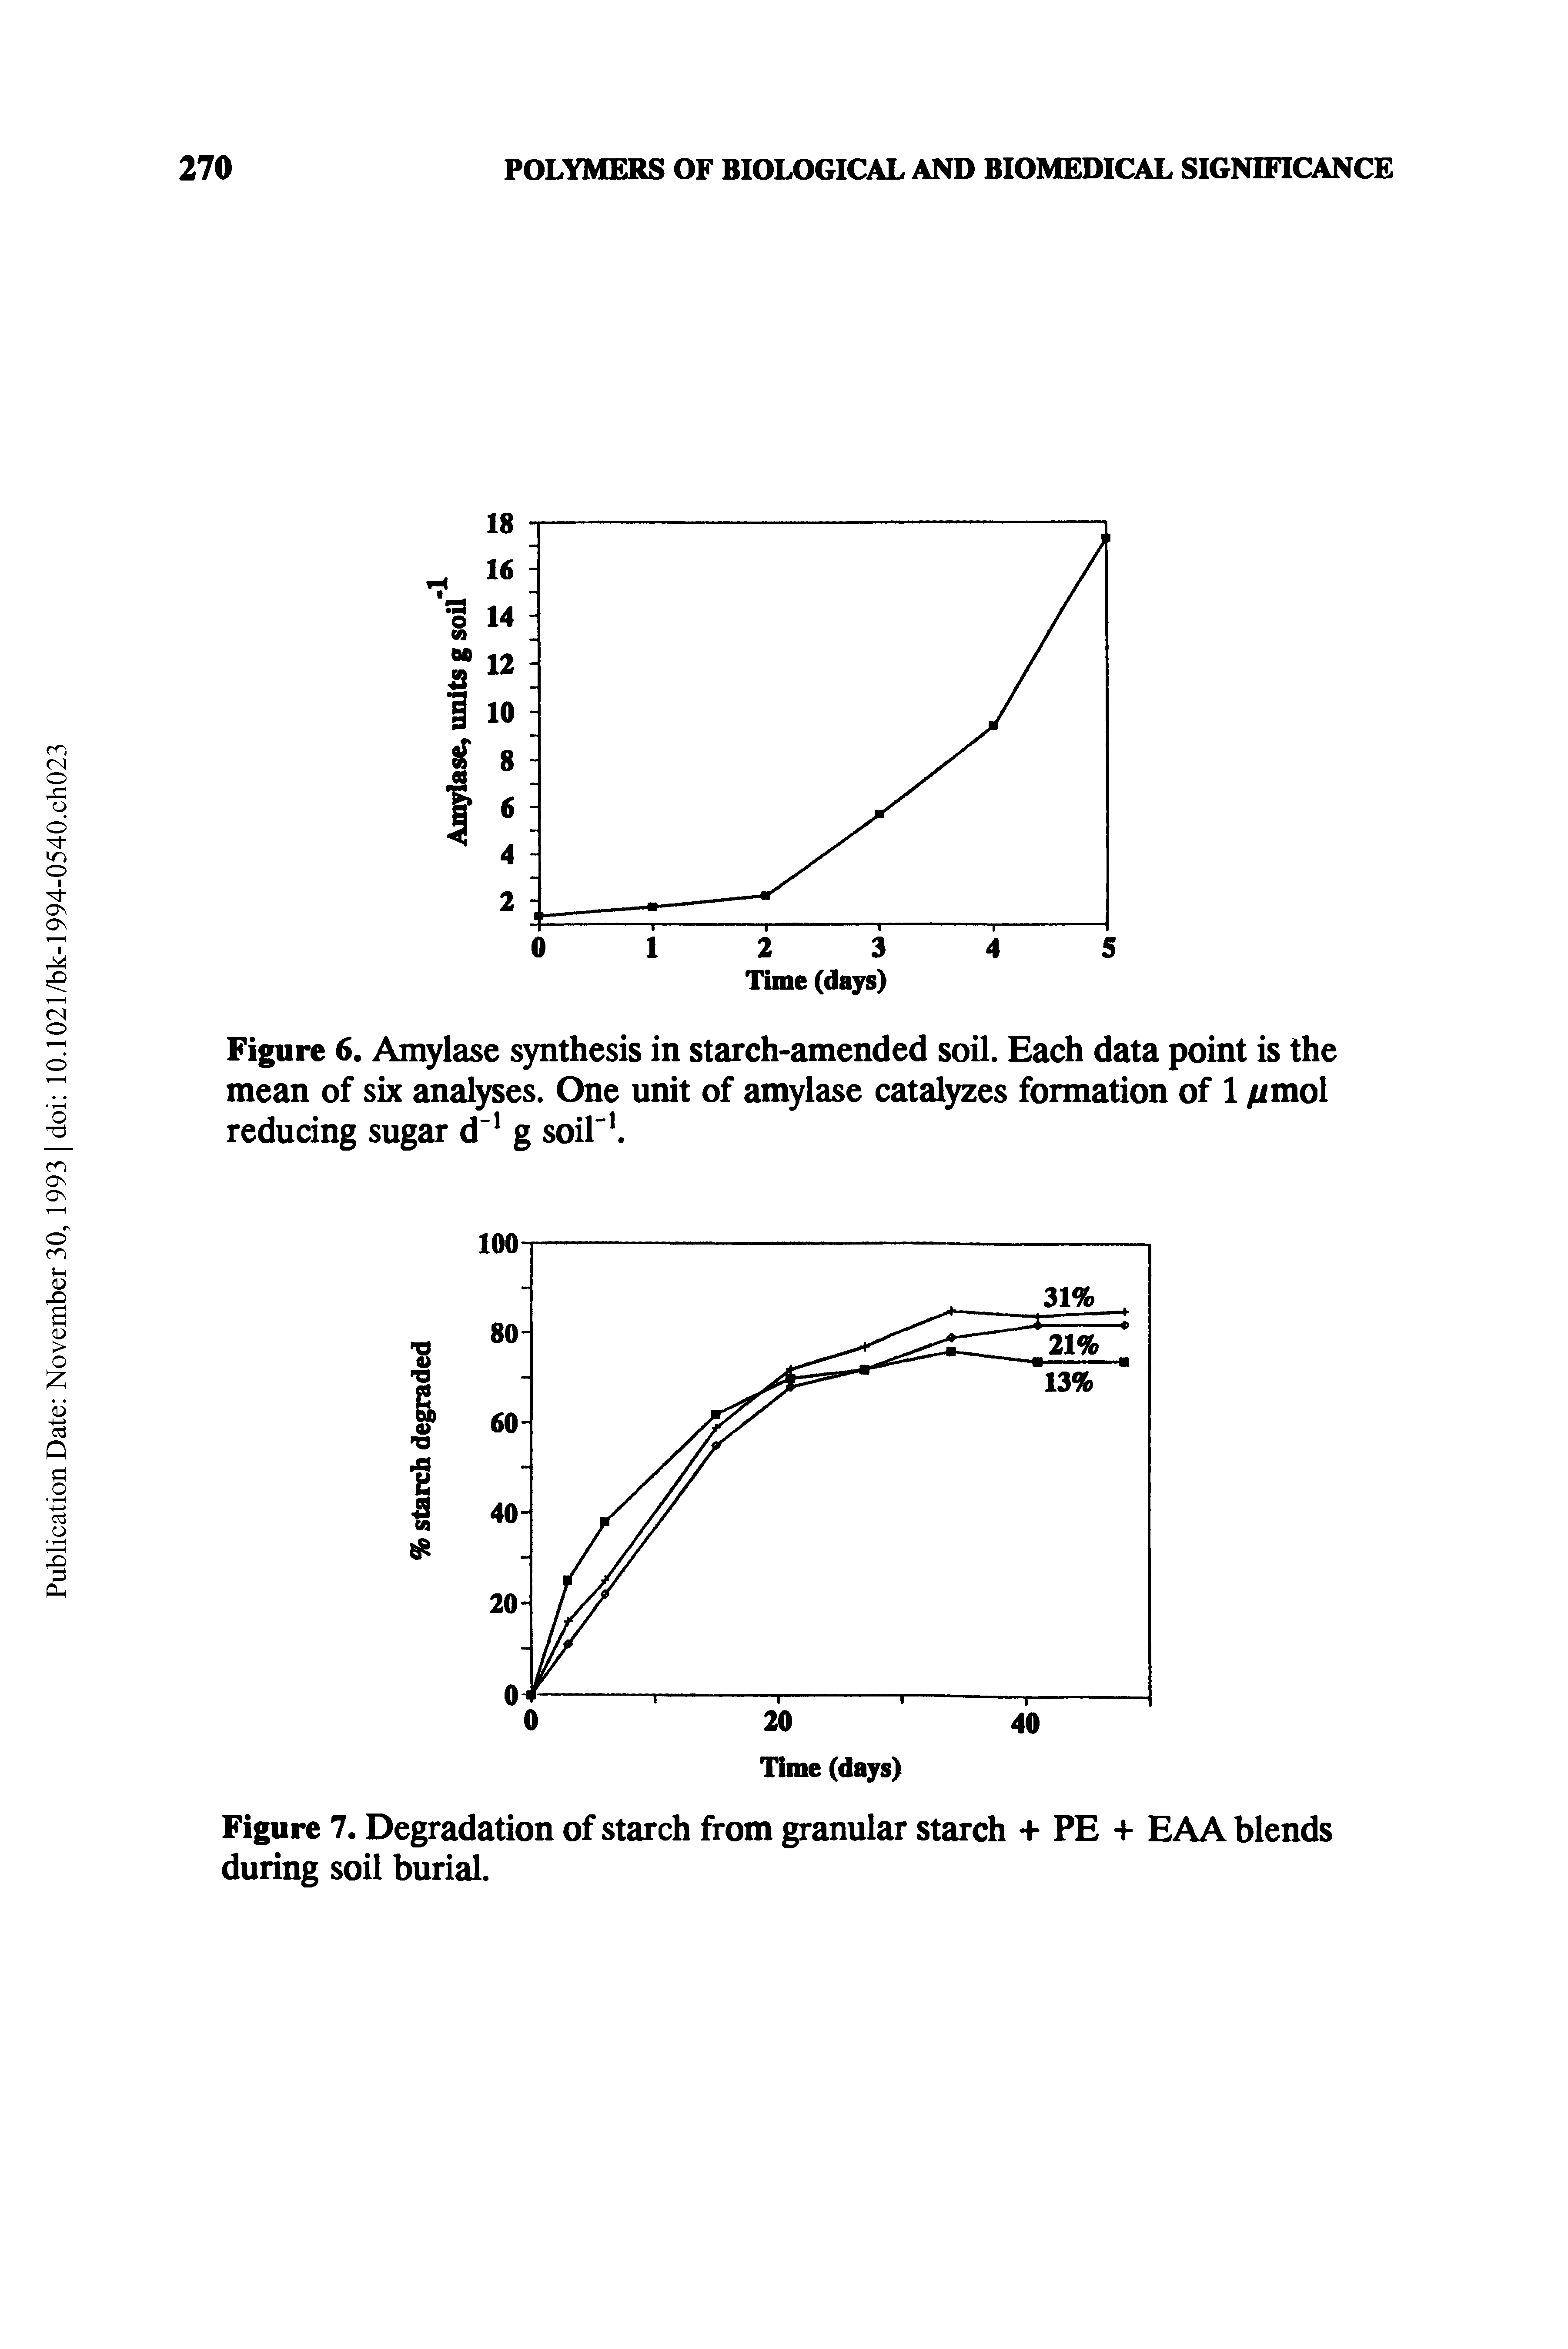 Figure 6. Amylase synthesis in starch-amended soil. Each data point is the mean of six analyses. One unit of amylase catalyzes formation of 1 imol reducing sugar d g soil". ...